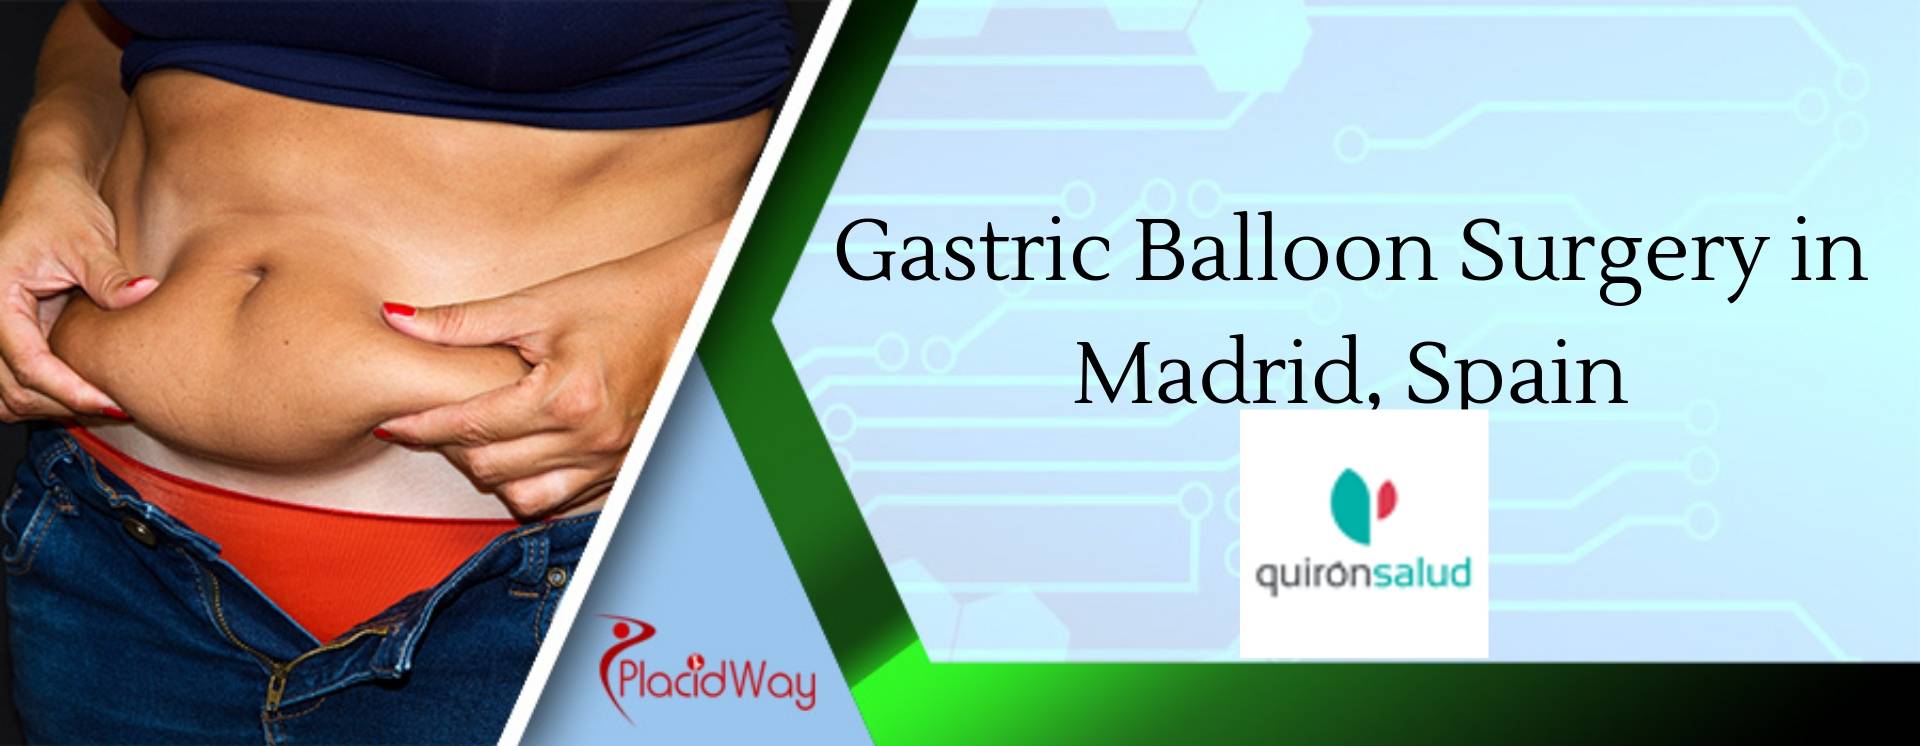 Gastric Balloon Surgery in Madrid, Spain